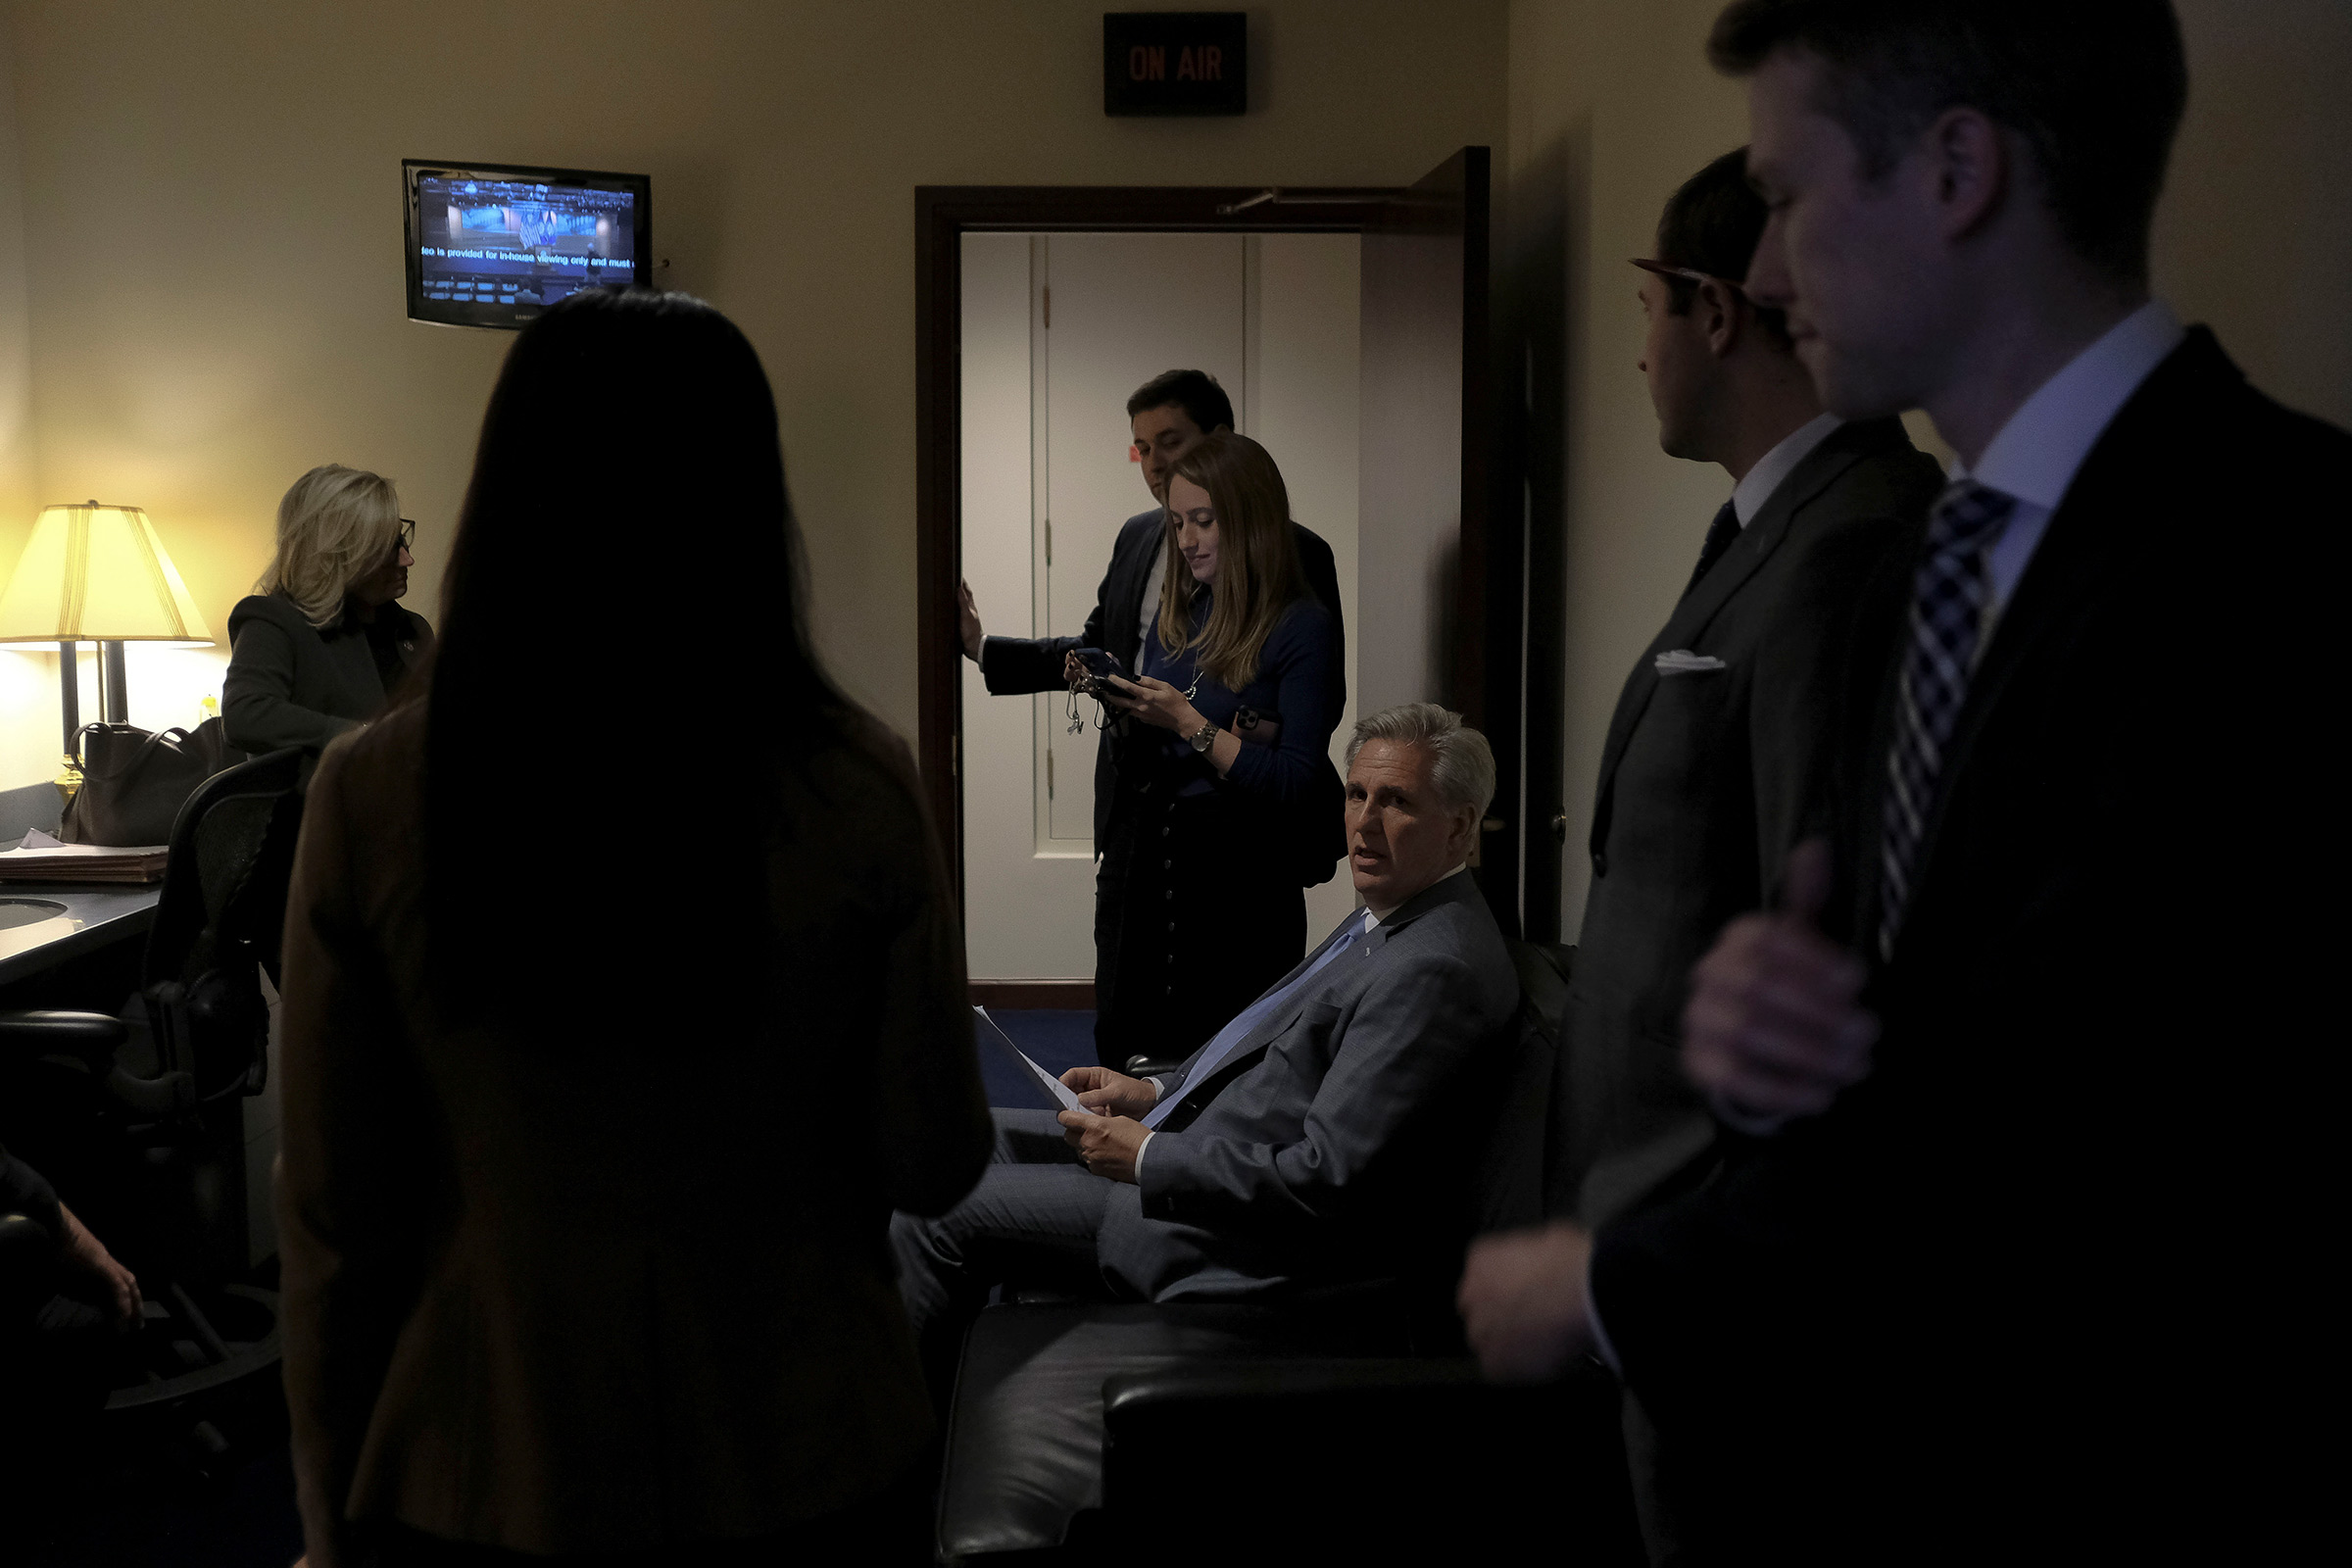 House Minority Leader Kevin McCarthy (R-Calif.) reads over his notes with other GOP leaders before a press conference denouncing the vote on the articles of impeachment at the Capitol in Washington, D.C., on Dec. 17, 2019. (Gabriella Demczuk for TIME)